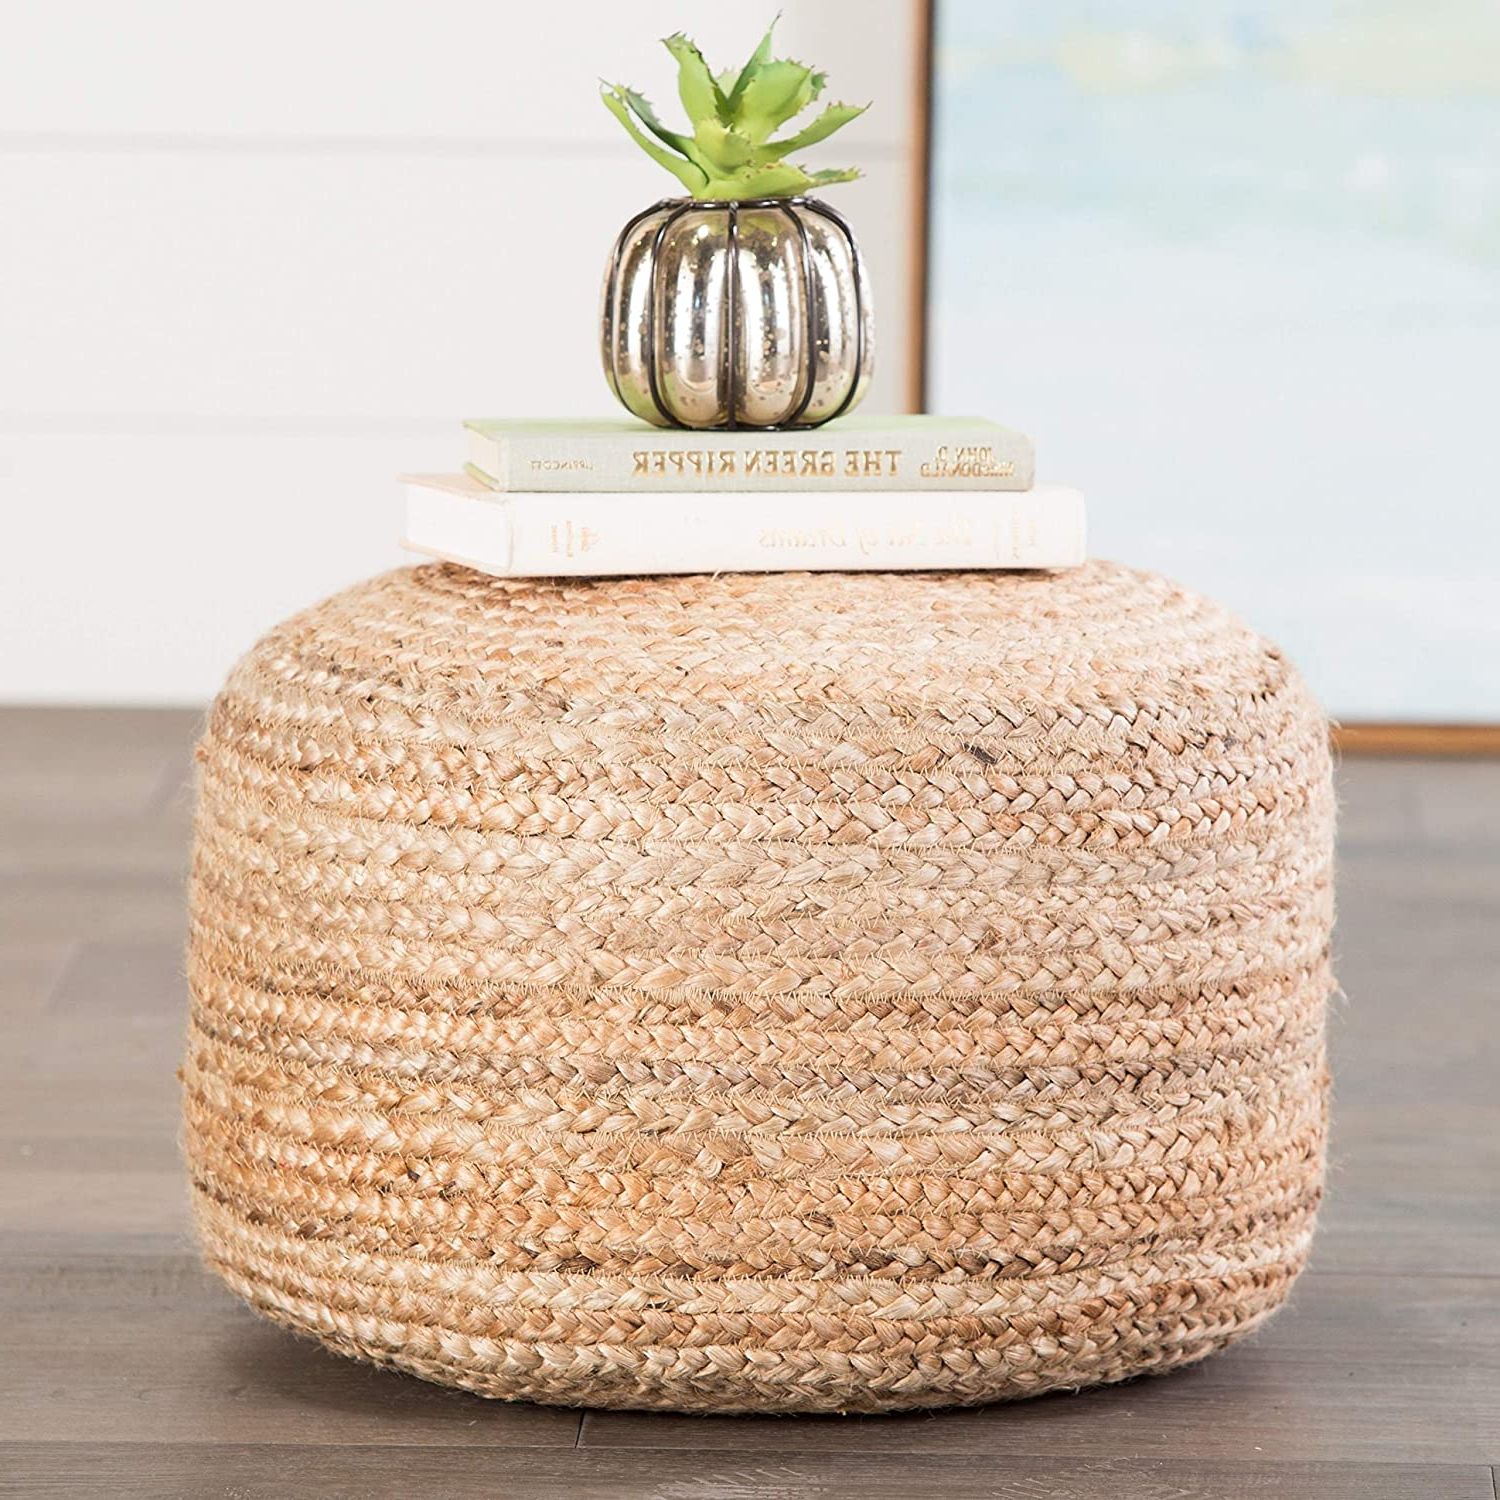 Favorite Beige And White Tall Cylinder Pouf Ottomans With Regard To Amazon: Natural Jute Ottoman, Beige Braided Rows Round Pouf Beads (View 10 of 10)